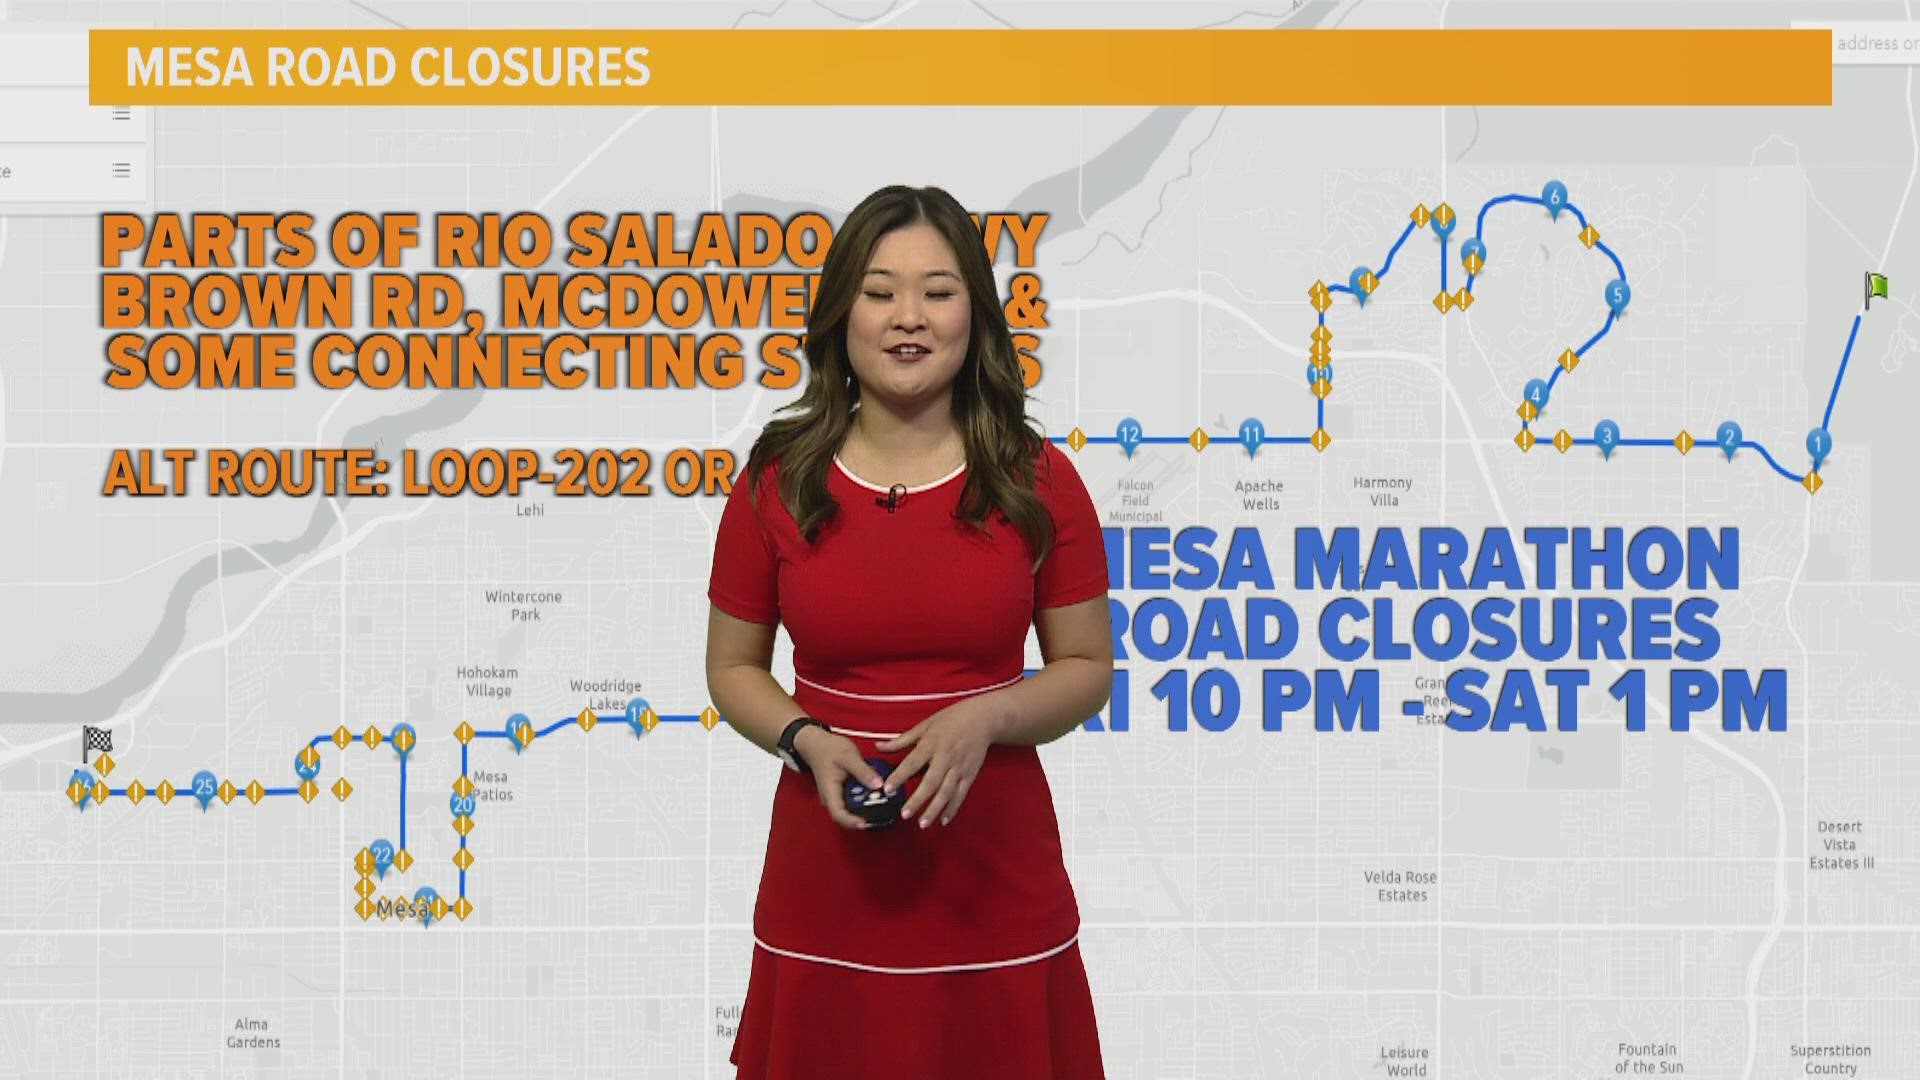 Stella Sun shares the restrictions and detours drivers will find on Valley roads for the weekend on Feb. 3.